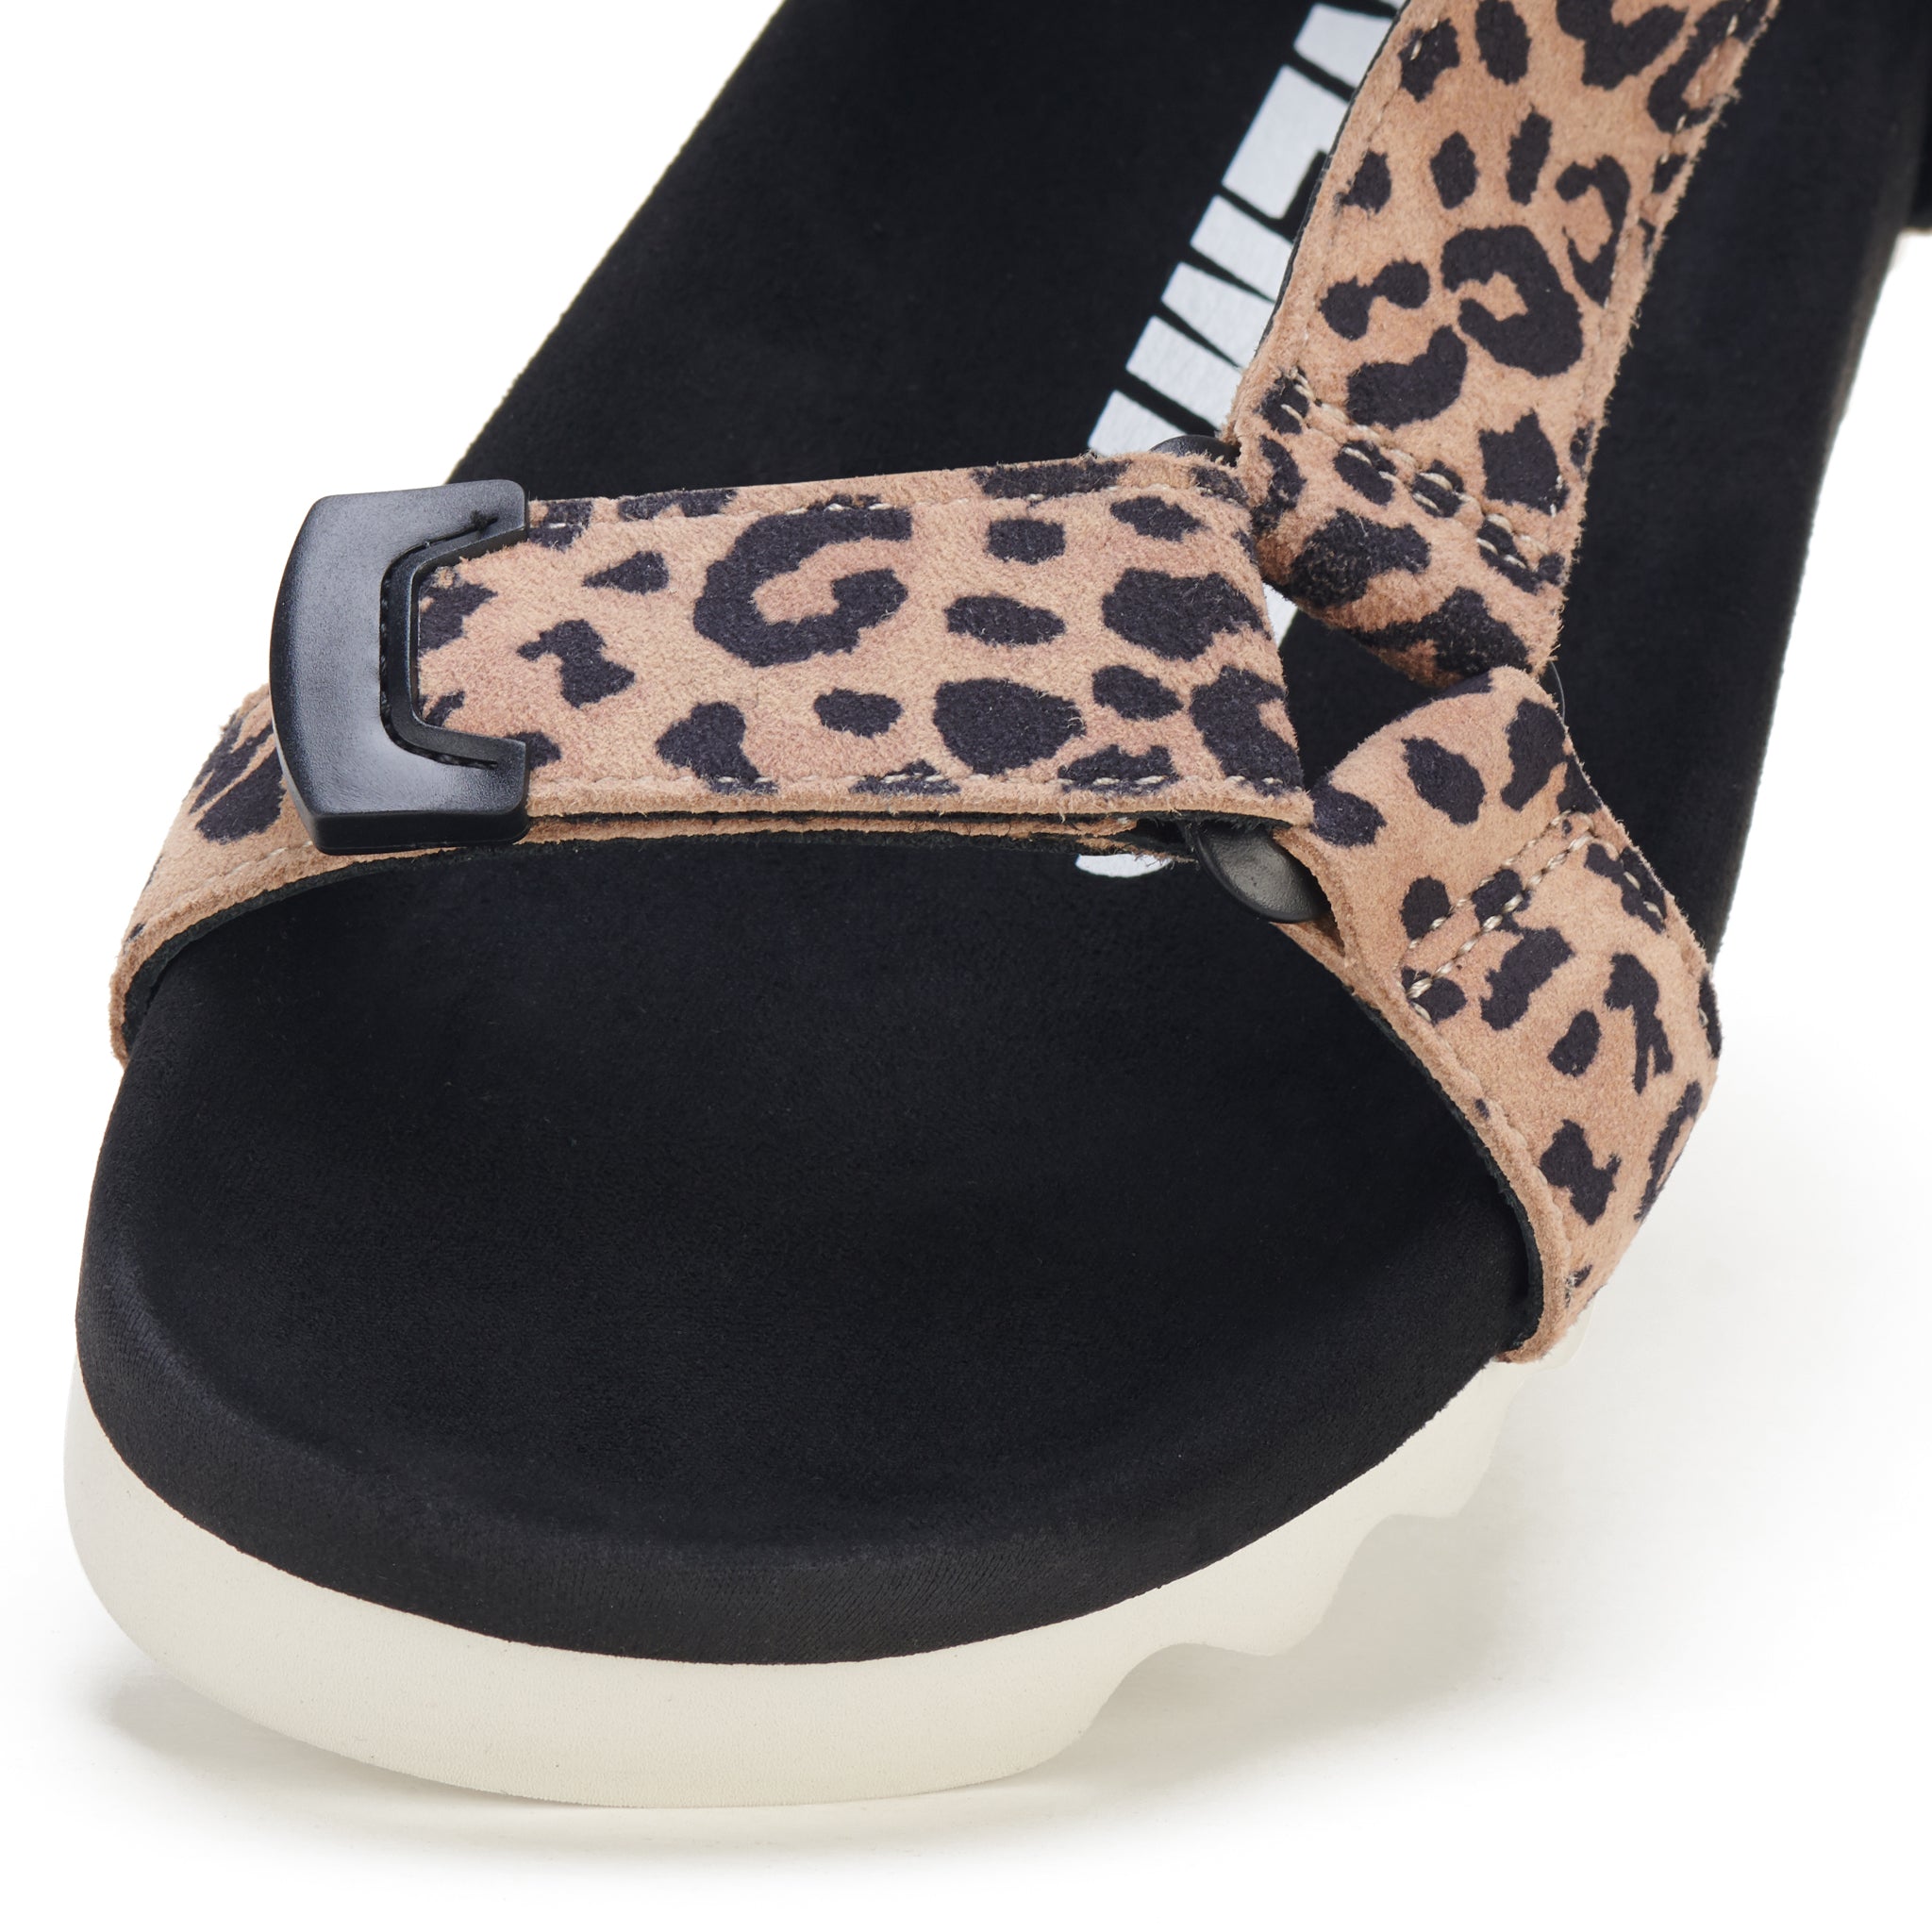 Rollie Nation | Sandal Tooth Wedge - Leopard